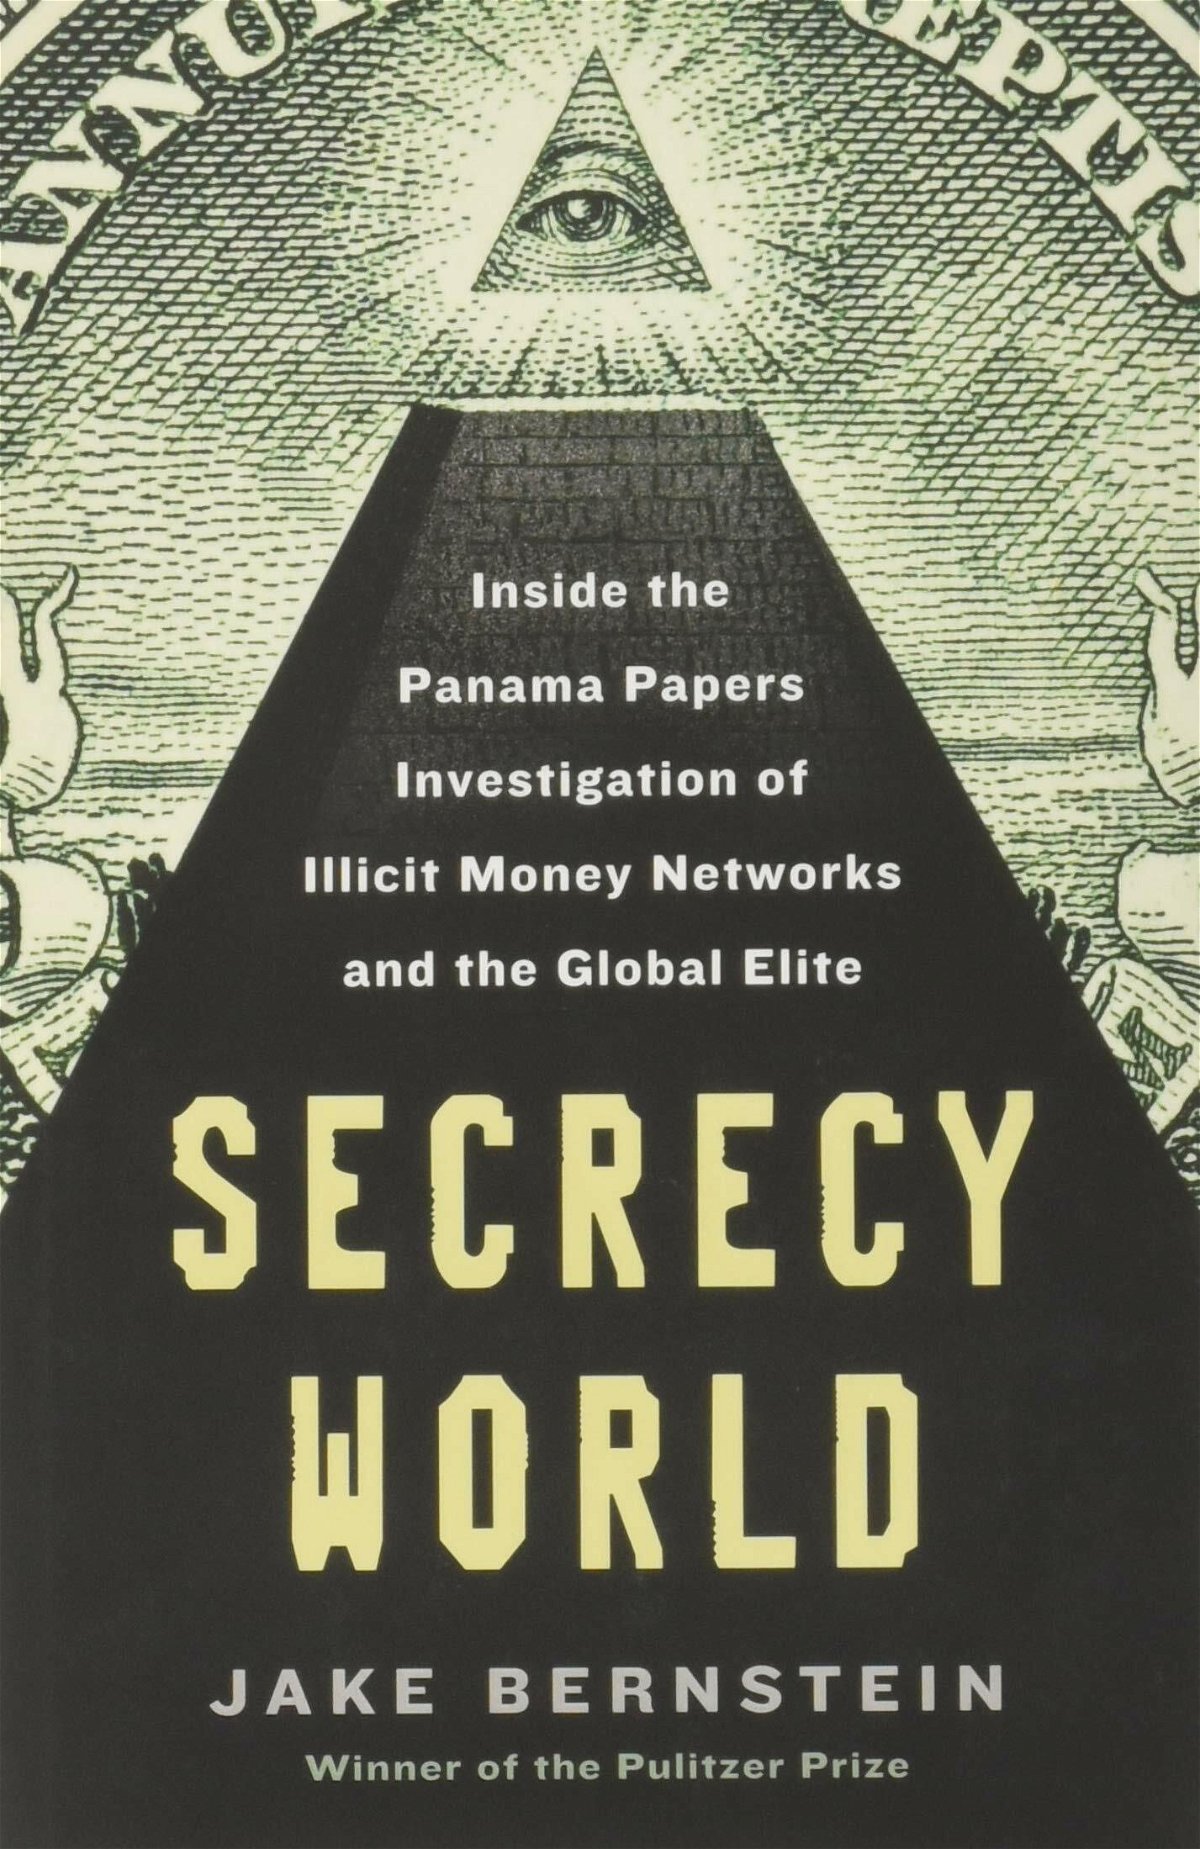 Il libro Secrecy World: Inside the Panama Papers Investigation of Illicit Money Networks and the Global Elite